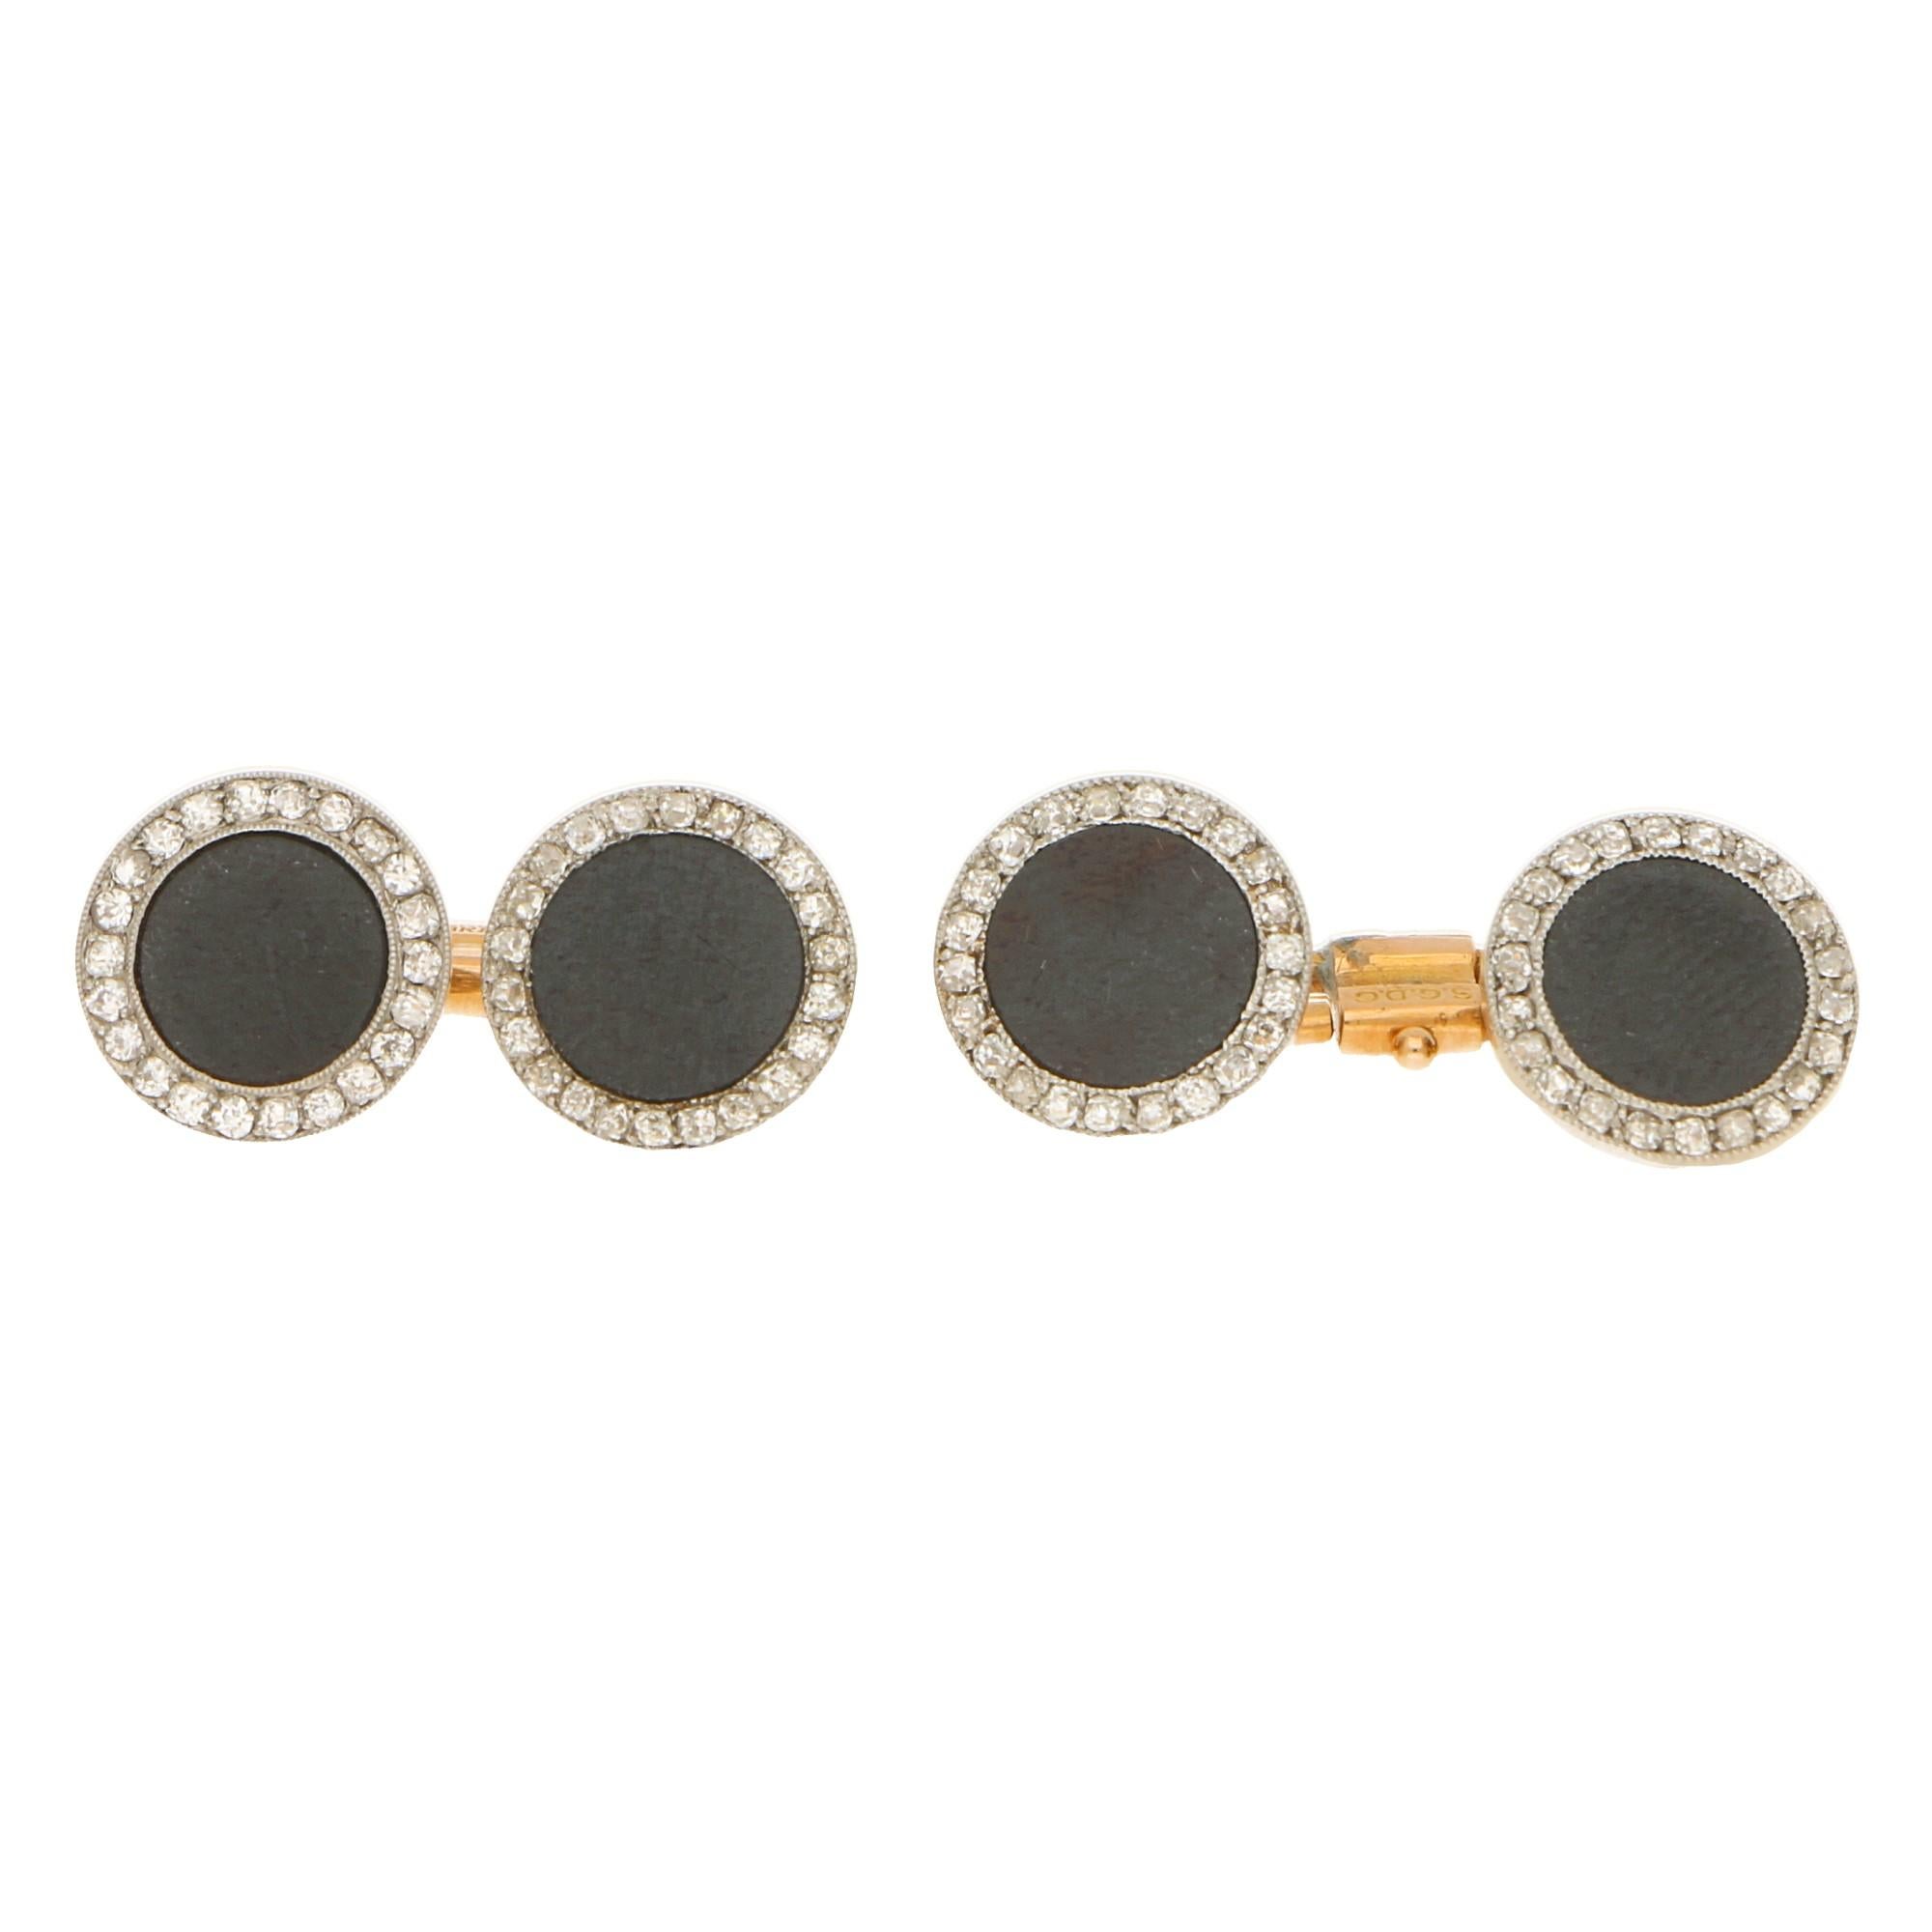 A spectacular Art Deco onyx and diamond dress set in platinum and yellow gold, cased by Cartier, French, circa 1920. 

The set is composed of a pair of cufflinks, four shirt studs and two waistcoat buttons en suite. Each double-sided cufflink is